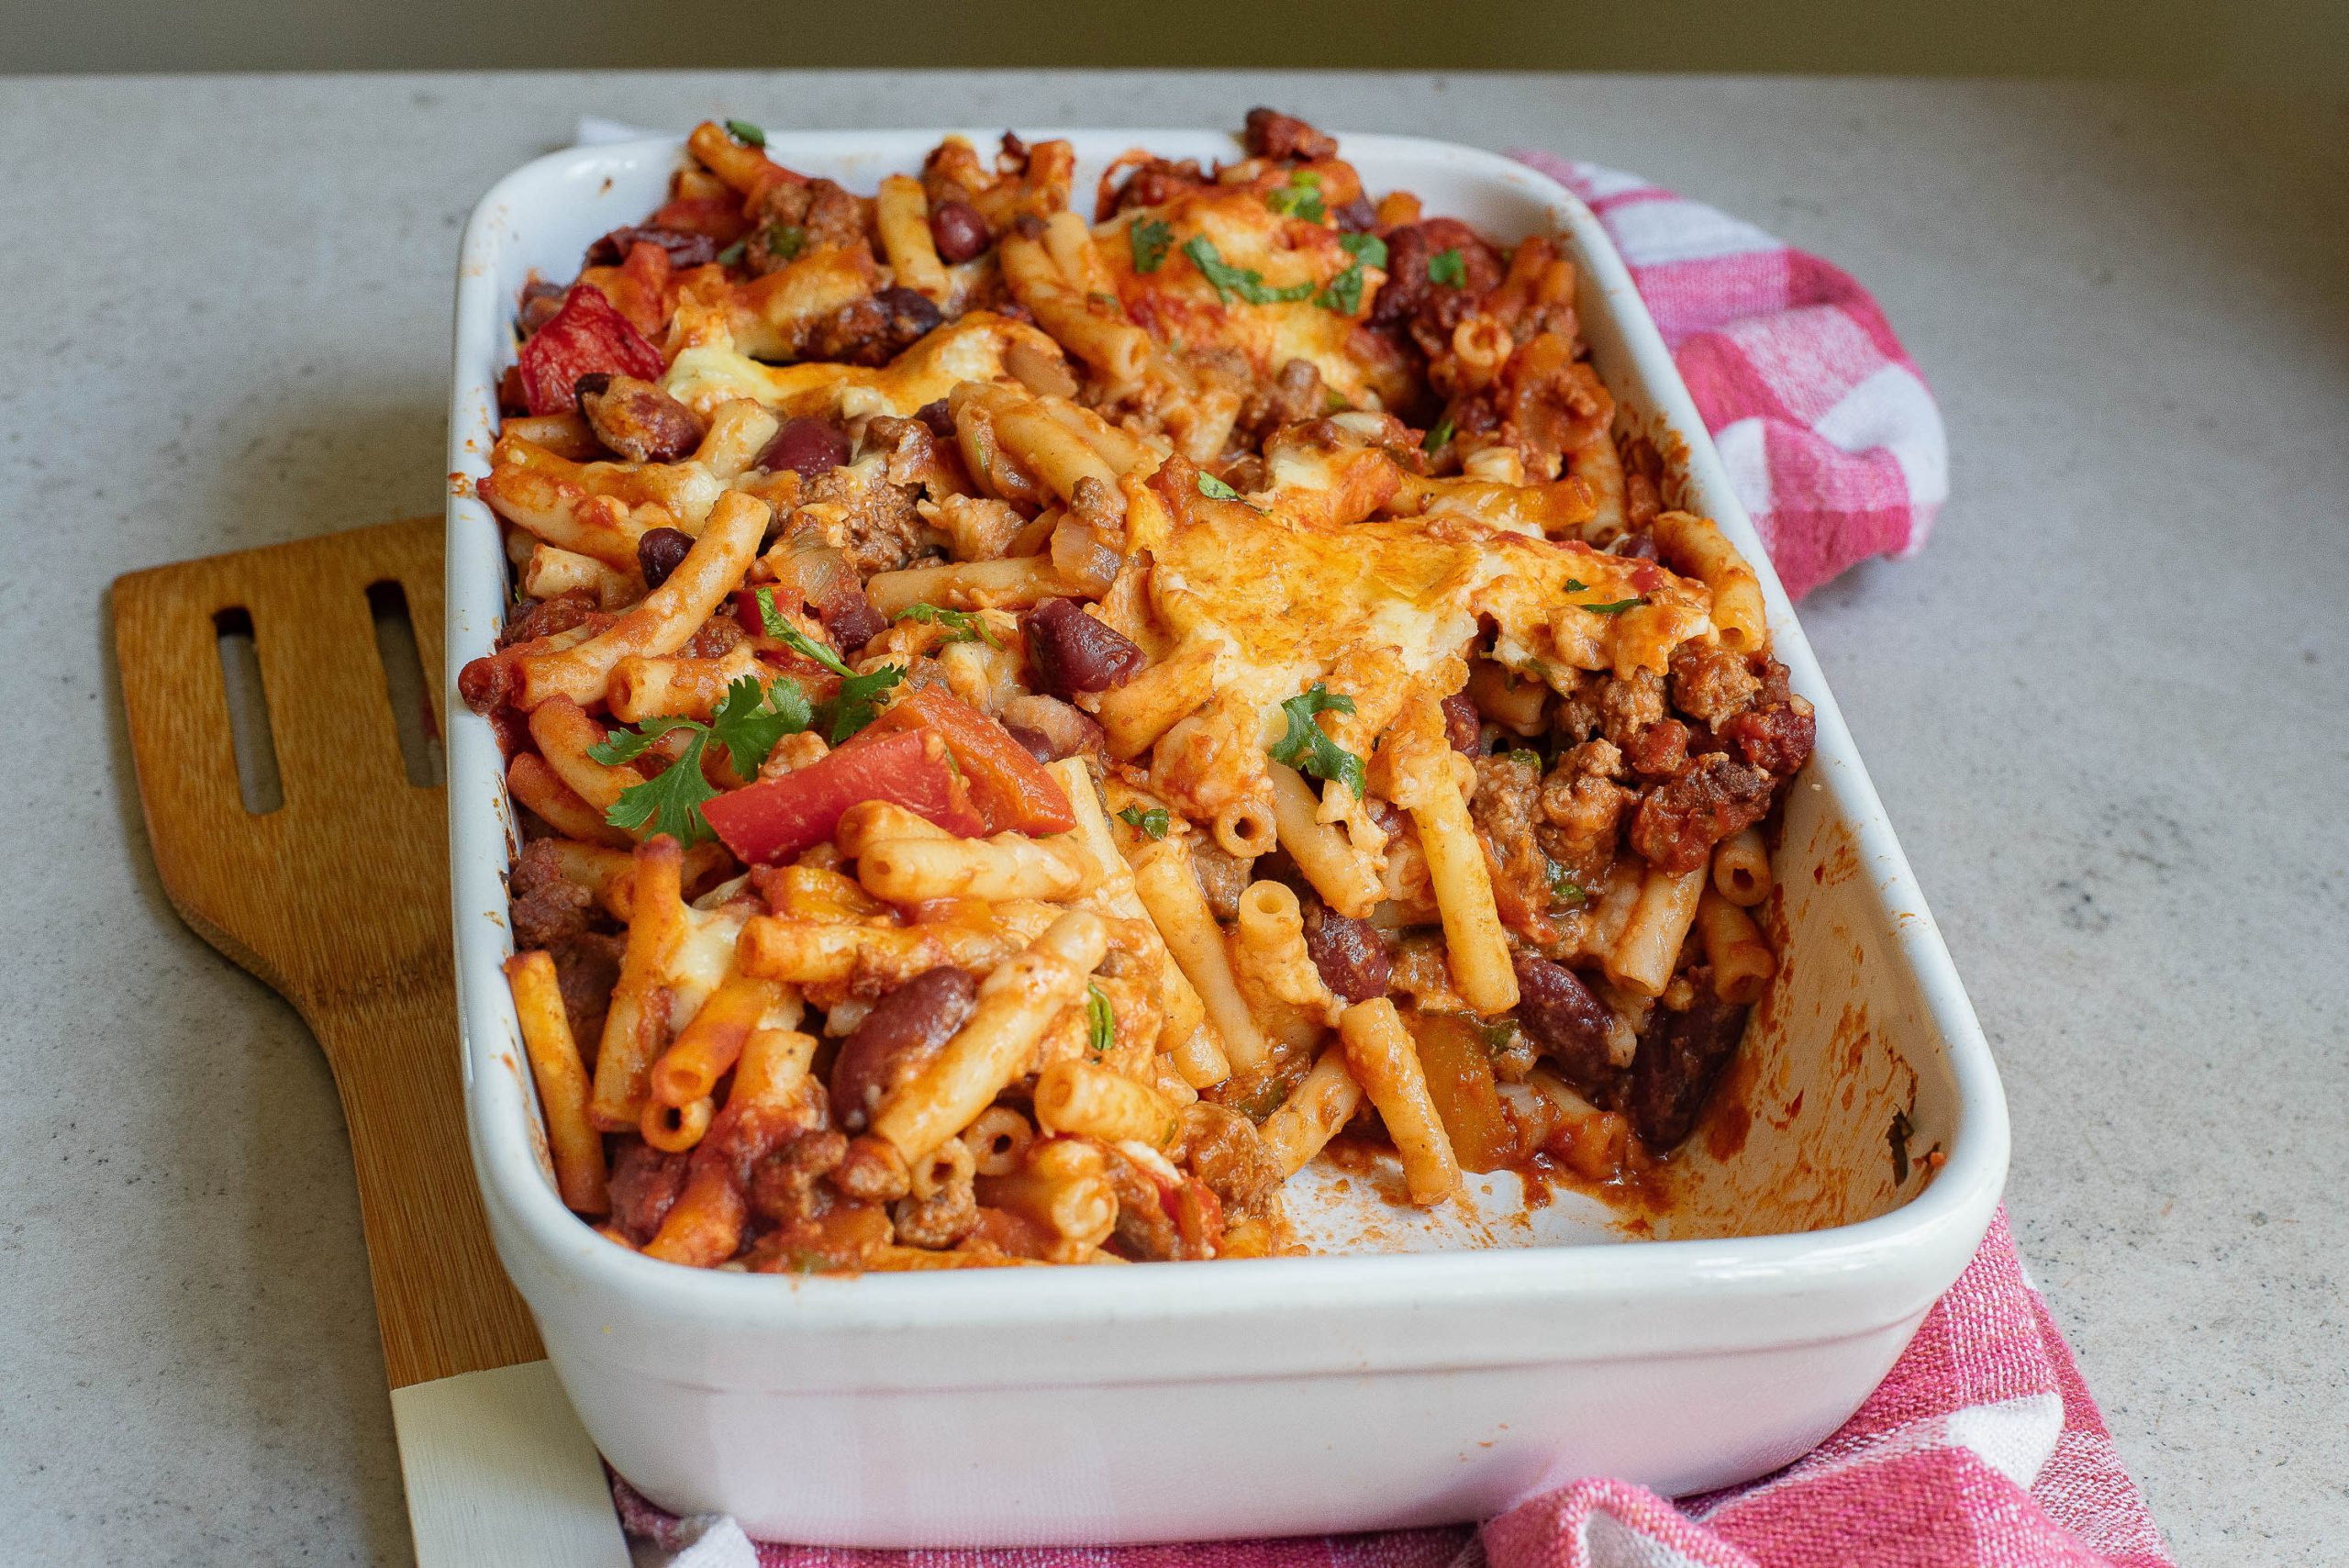 A casserole dish filled with pasta and beans.